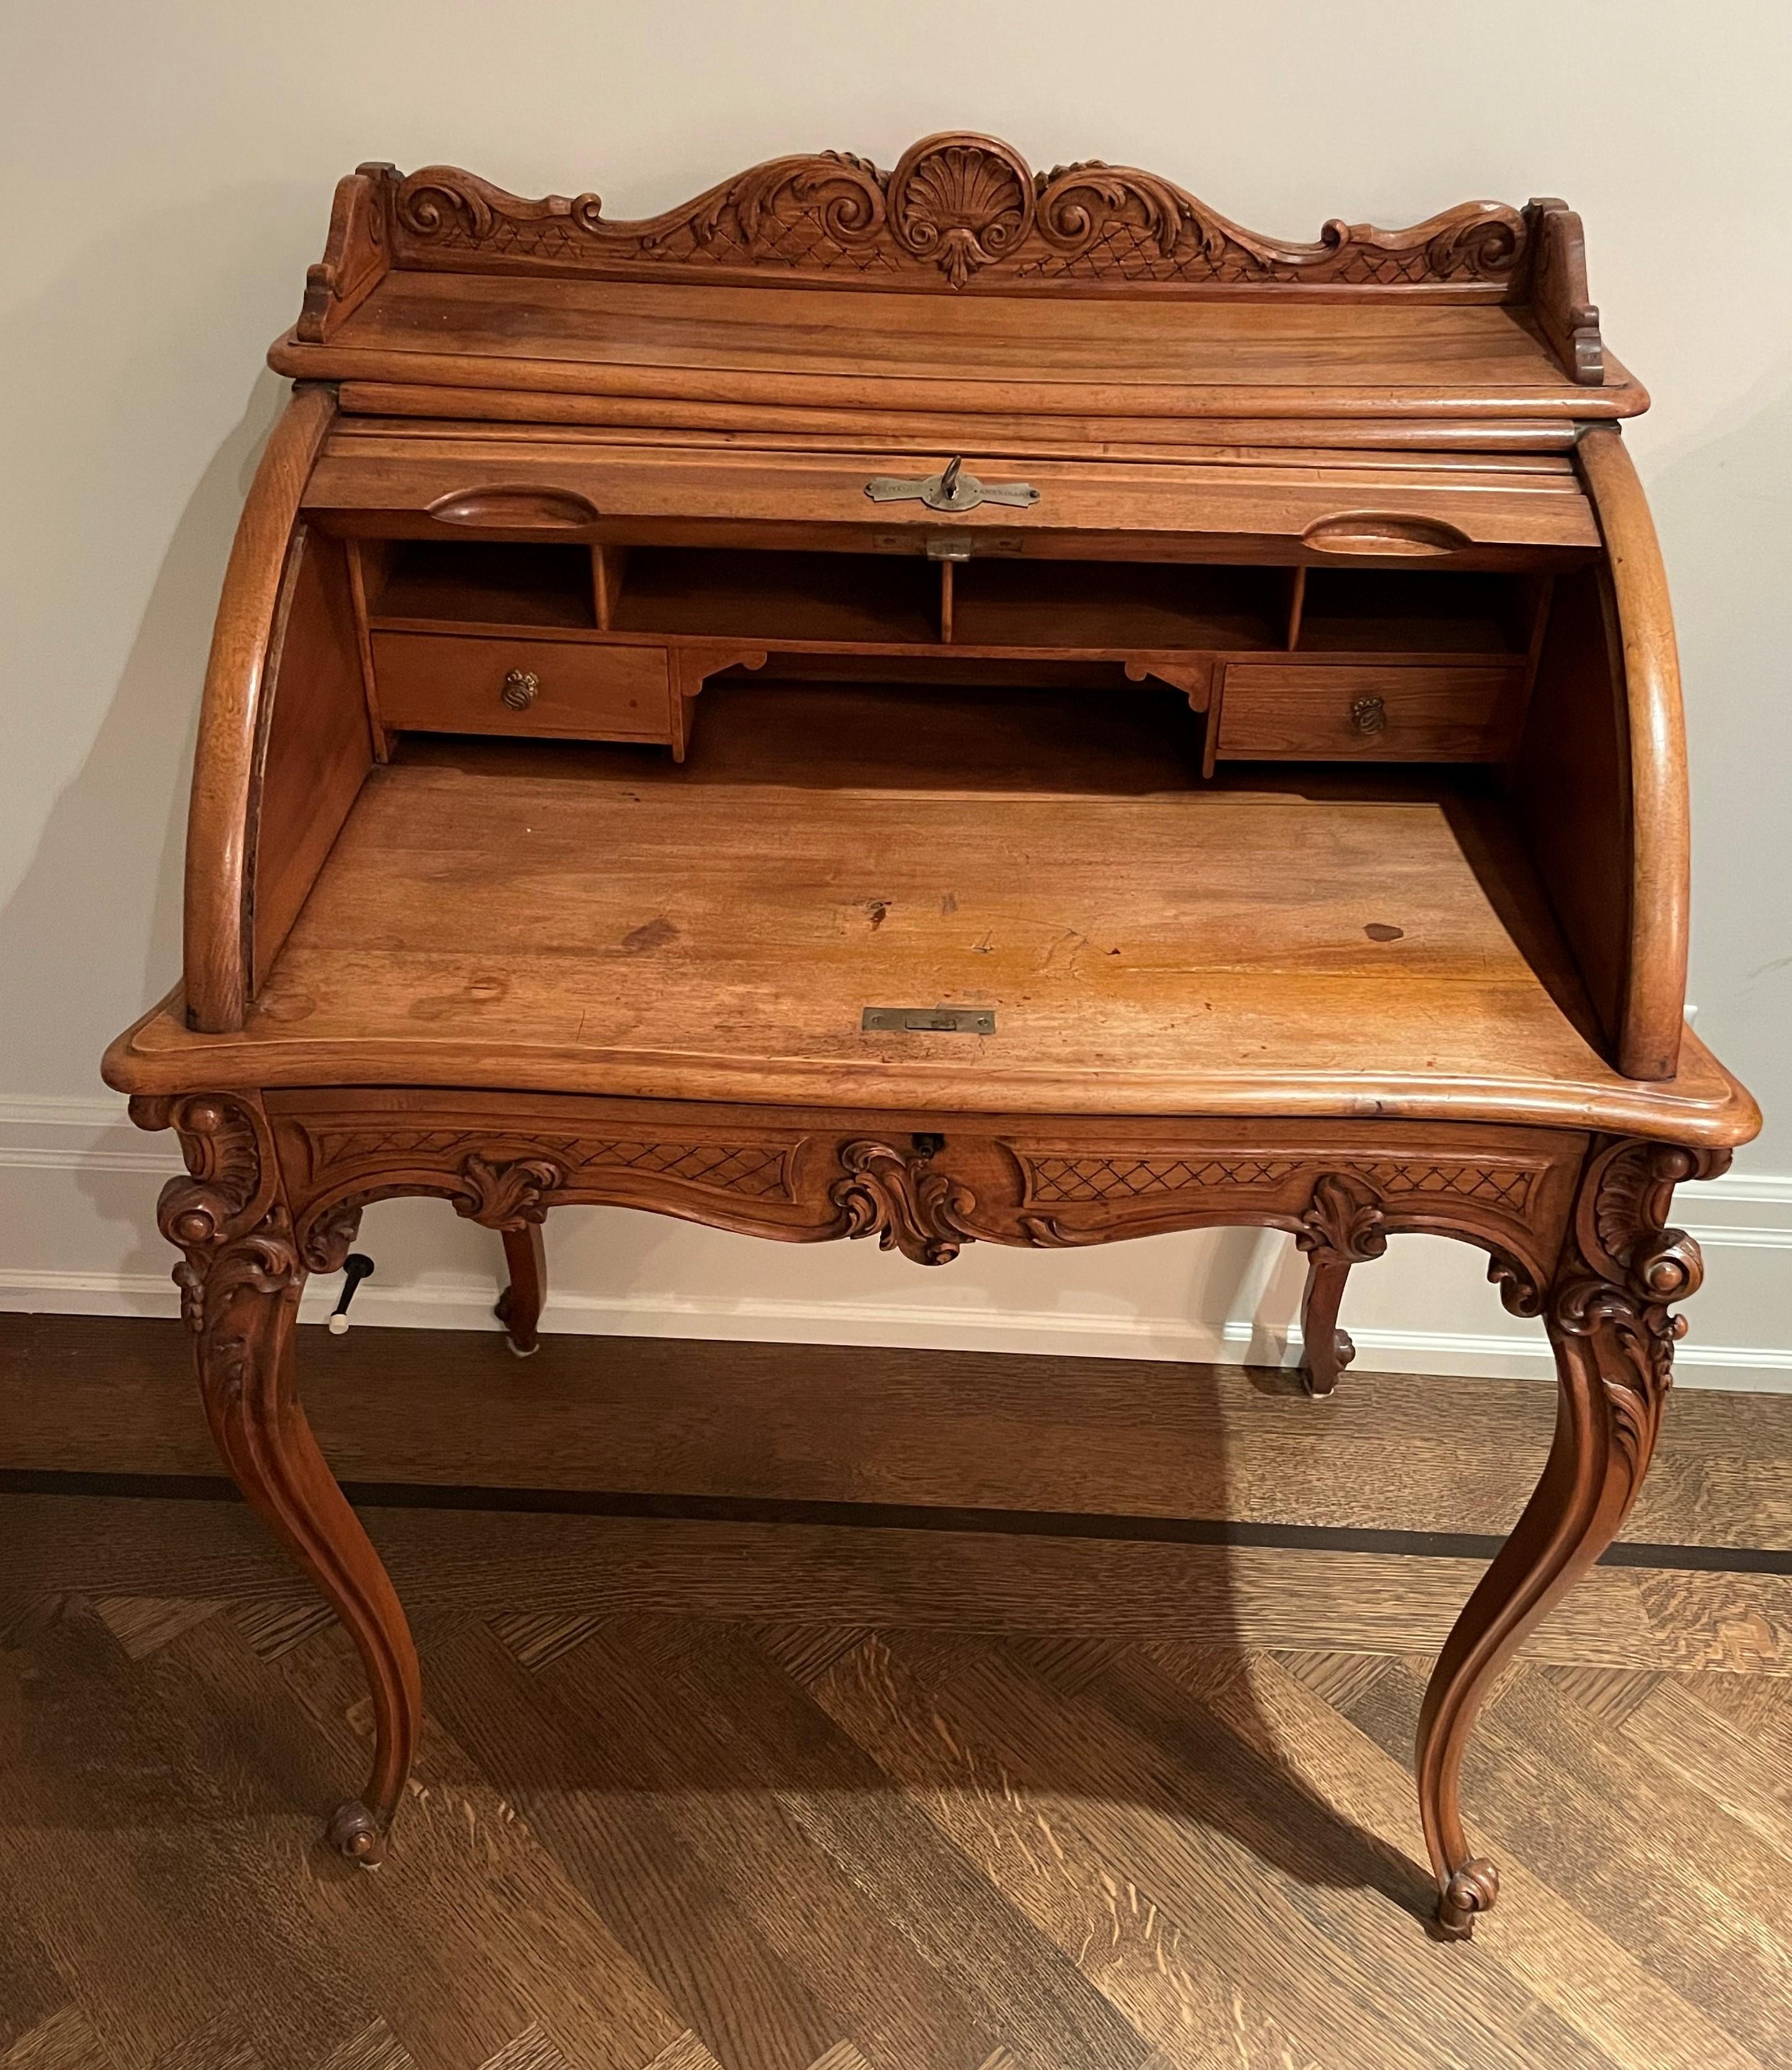 A charming roll top desk in the style of Louis XV made in walnut having interesting and attractive hand carved elements. The size is perfect to fit in smaller place in your home. it is highly decorative and functional. There is a large drawer as